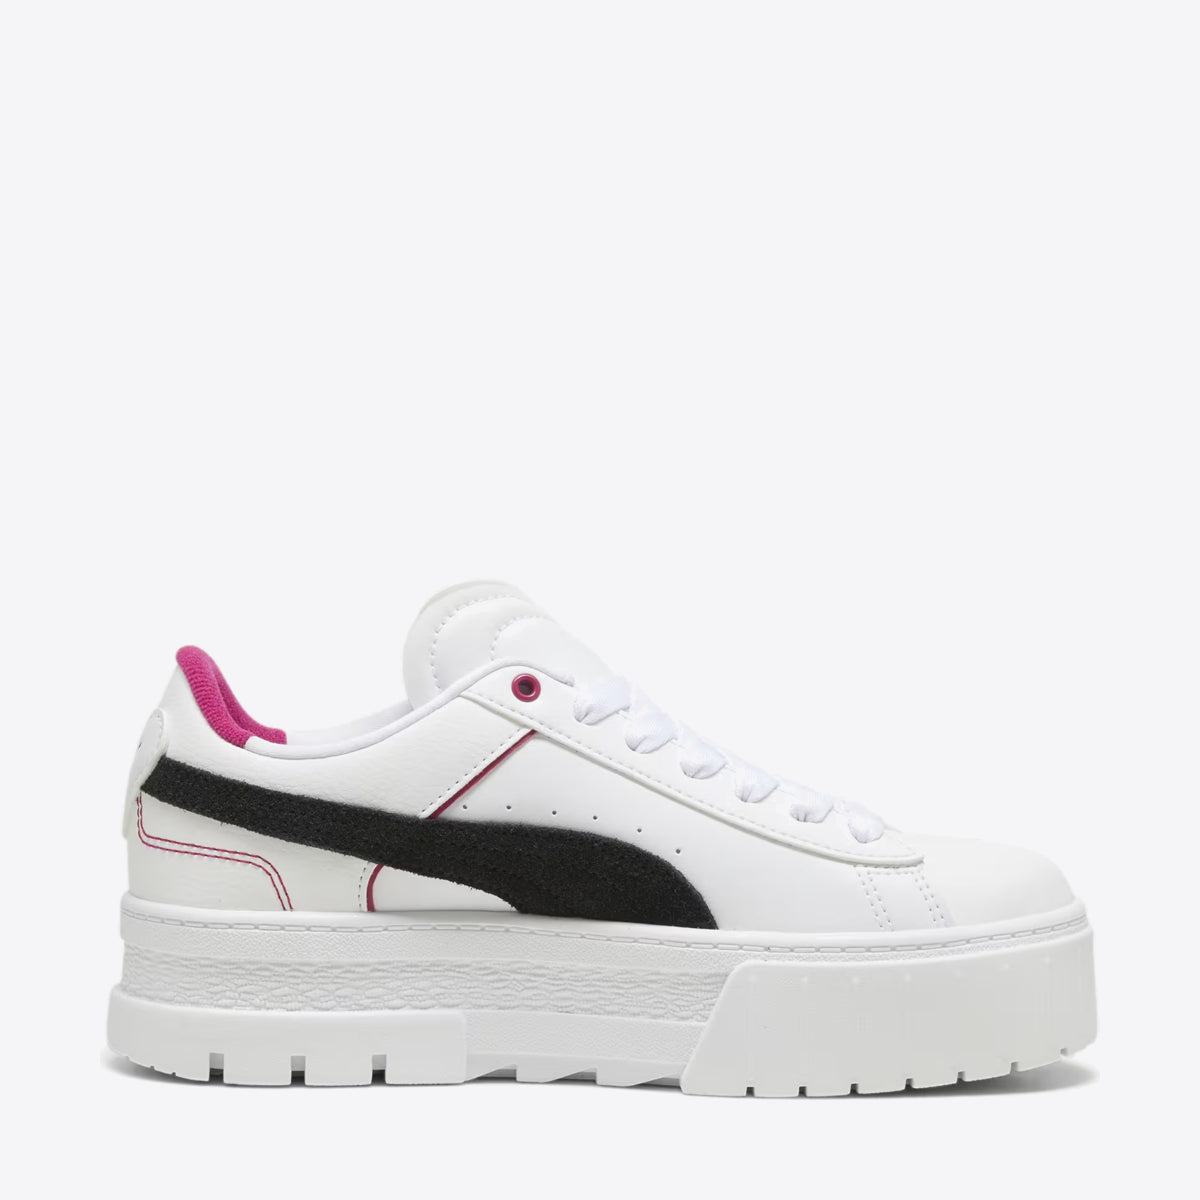 PUMA Mayze Queen of Hearts White/Black/Pink - Image 1